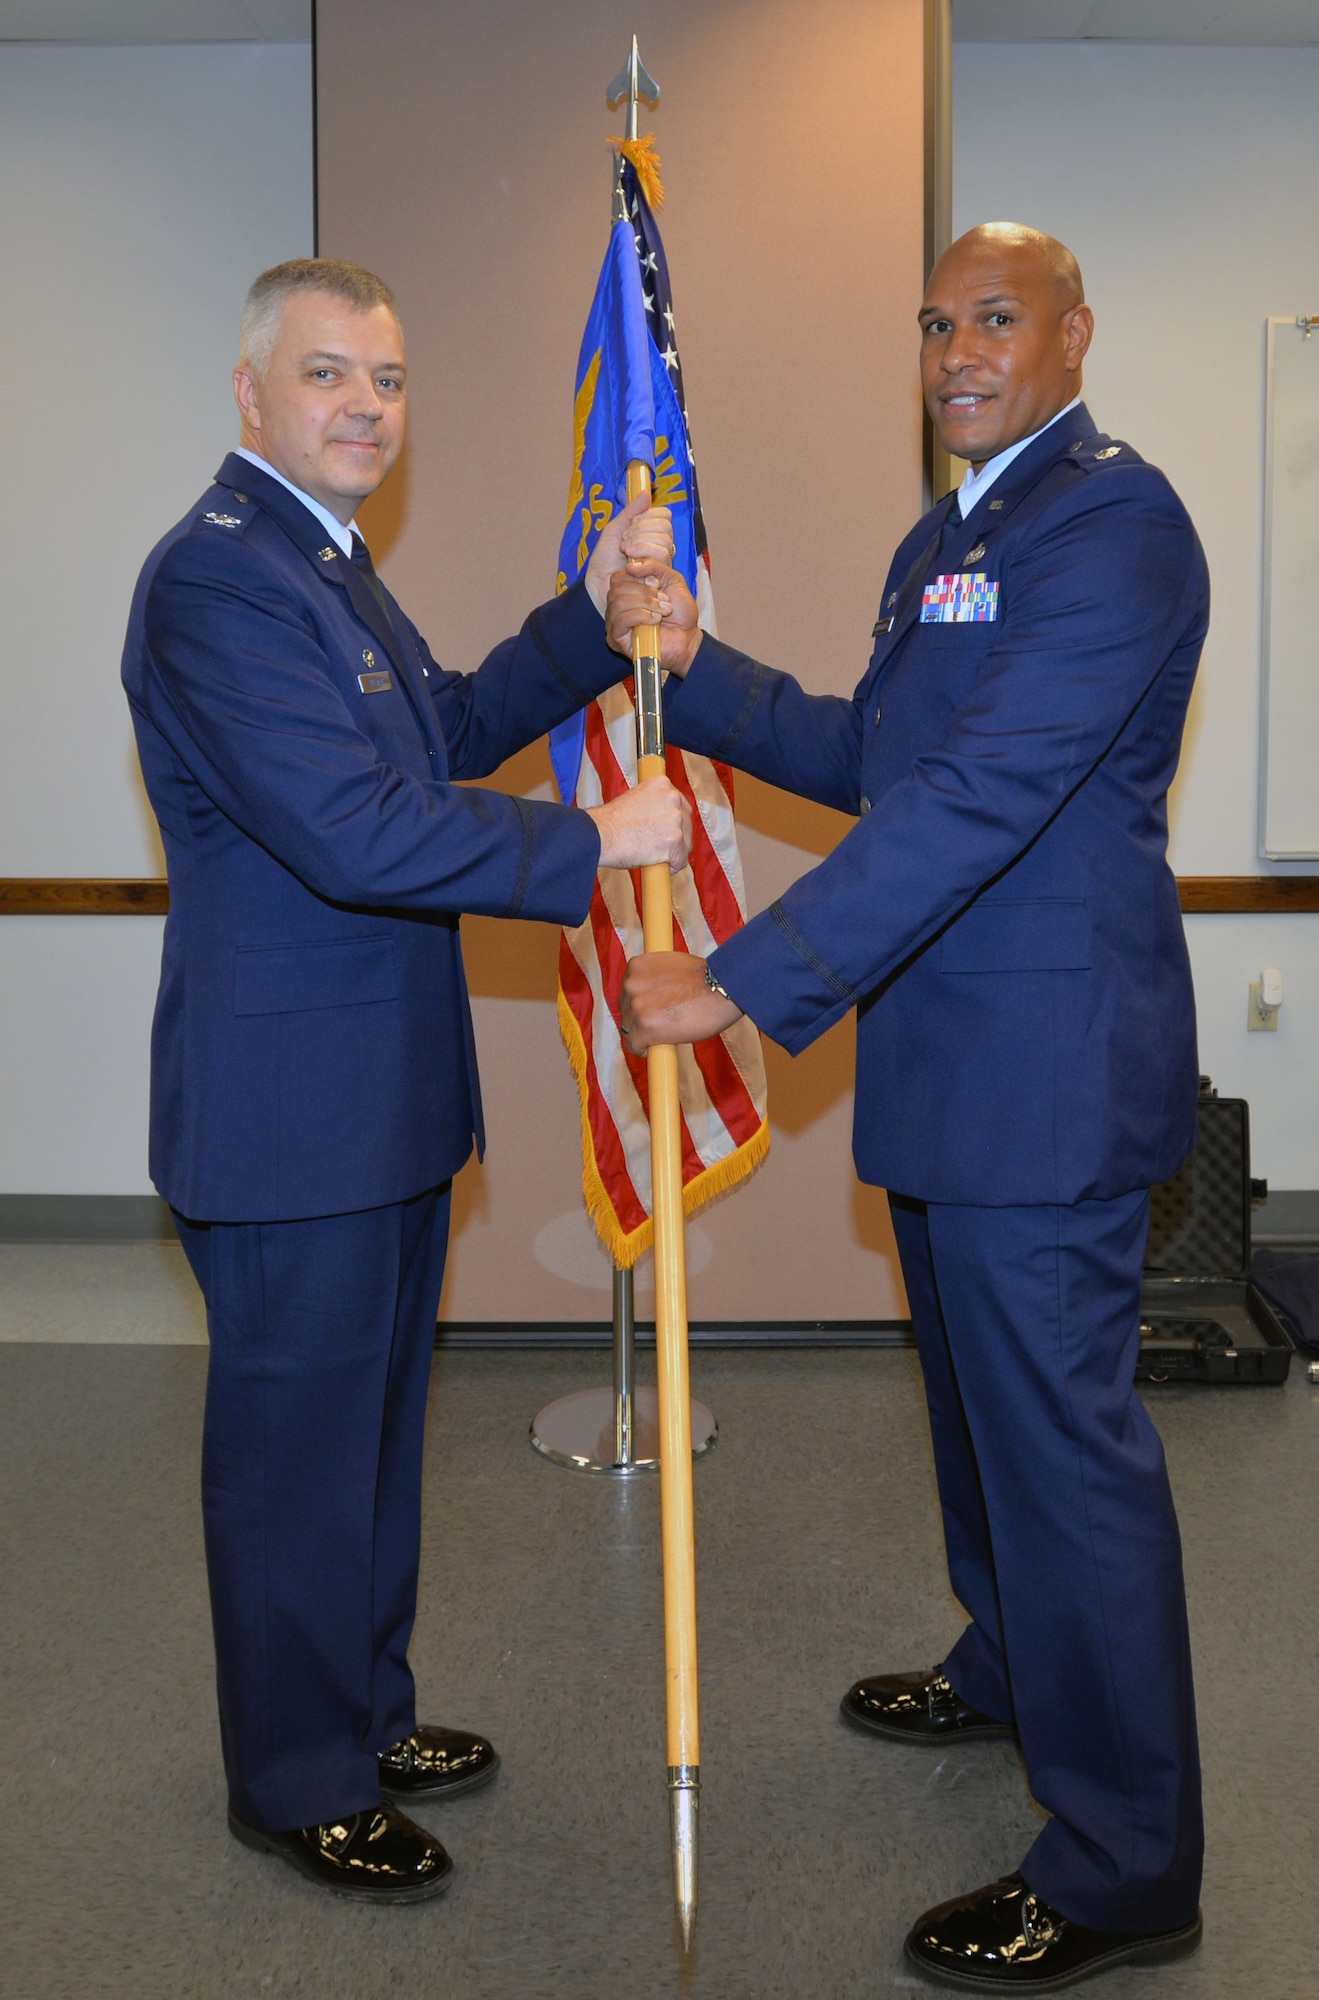 Col. Wayne M. Williams, 433rd Mission Support Group commander, hands the 26th Aerial Port Squadron guidon to Lt. Col. Eric L. Chancellor signaling his squadron command assumption.